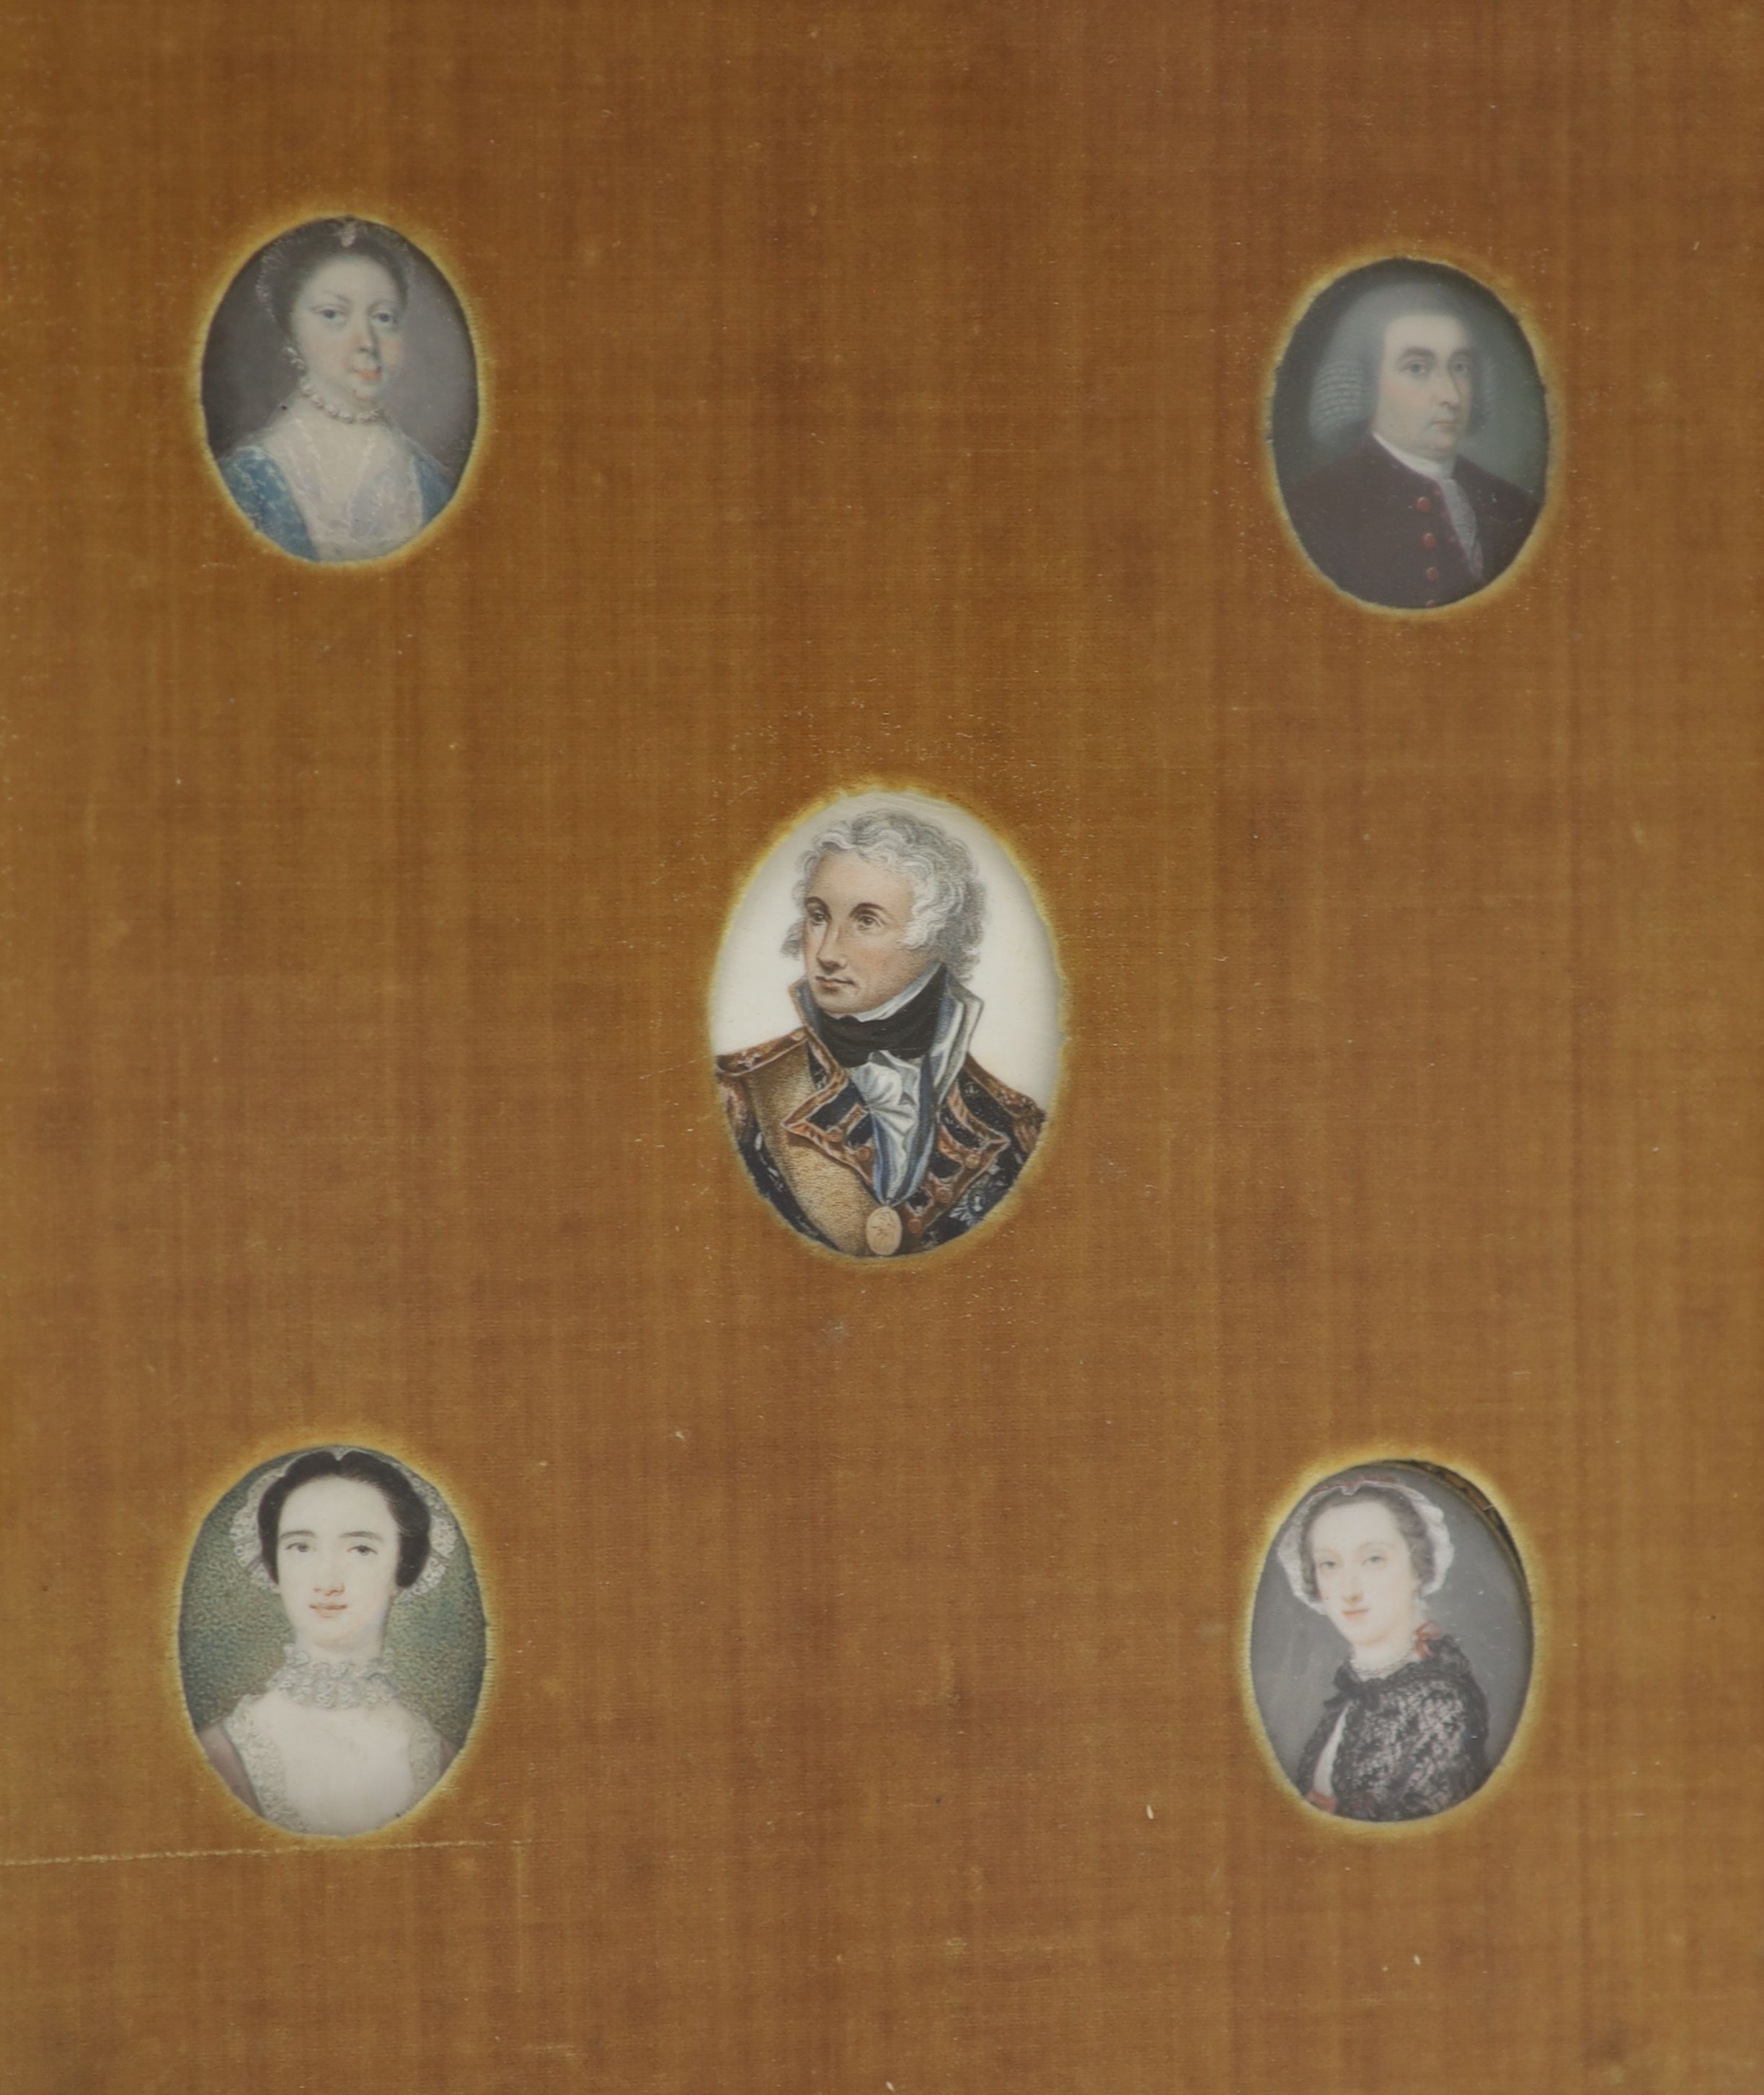 Irish School circa 1800 , Miniature portraits of members of the Burges family and of Lord Nelson, watercolour on ivory, Largest 5 x 3.5 cm